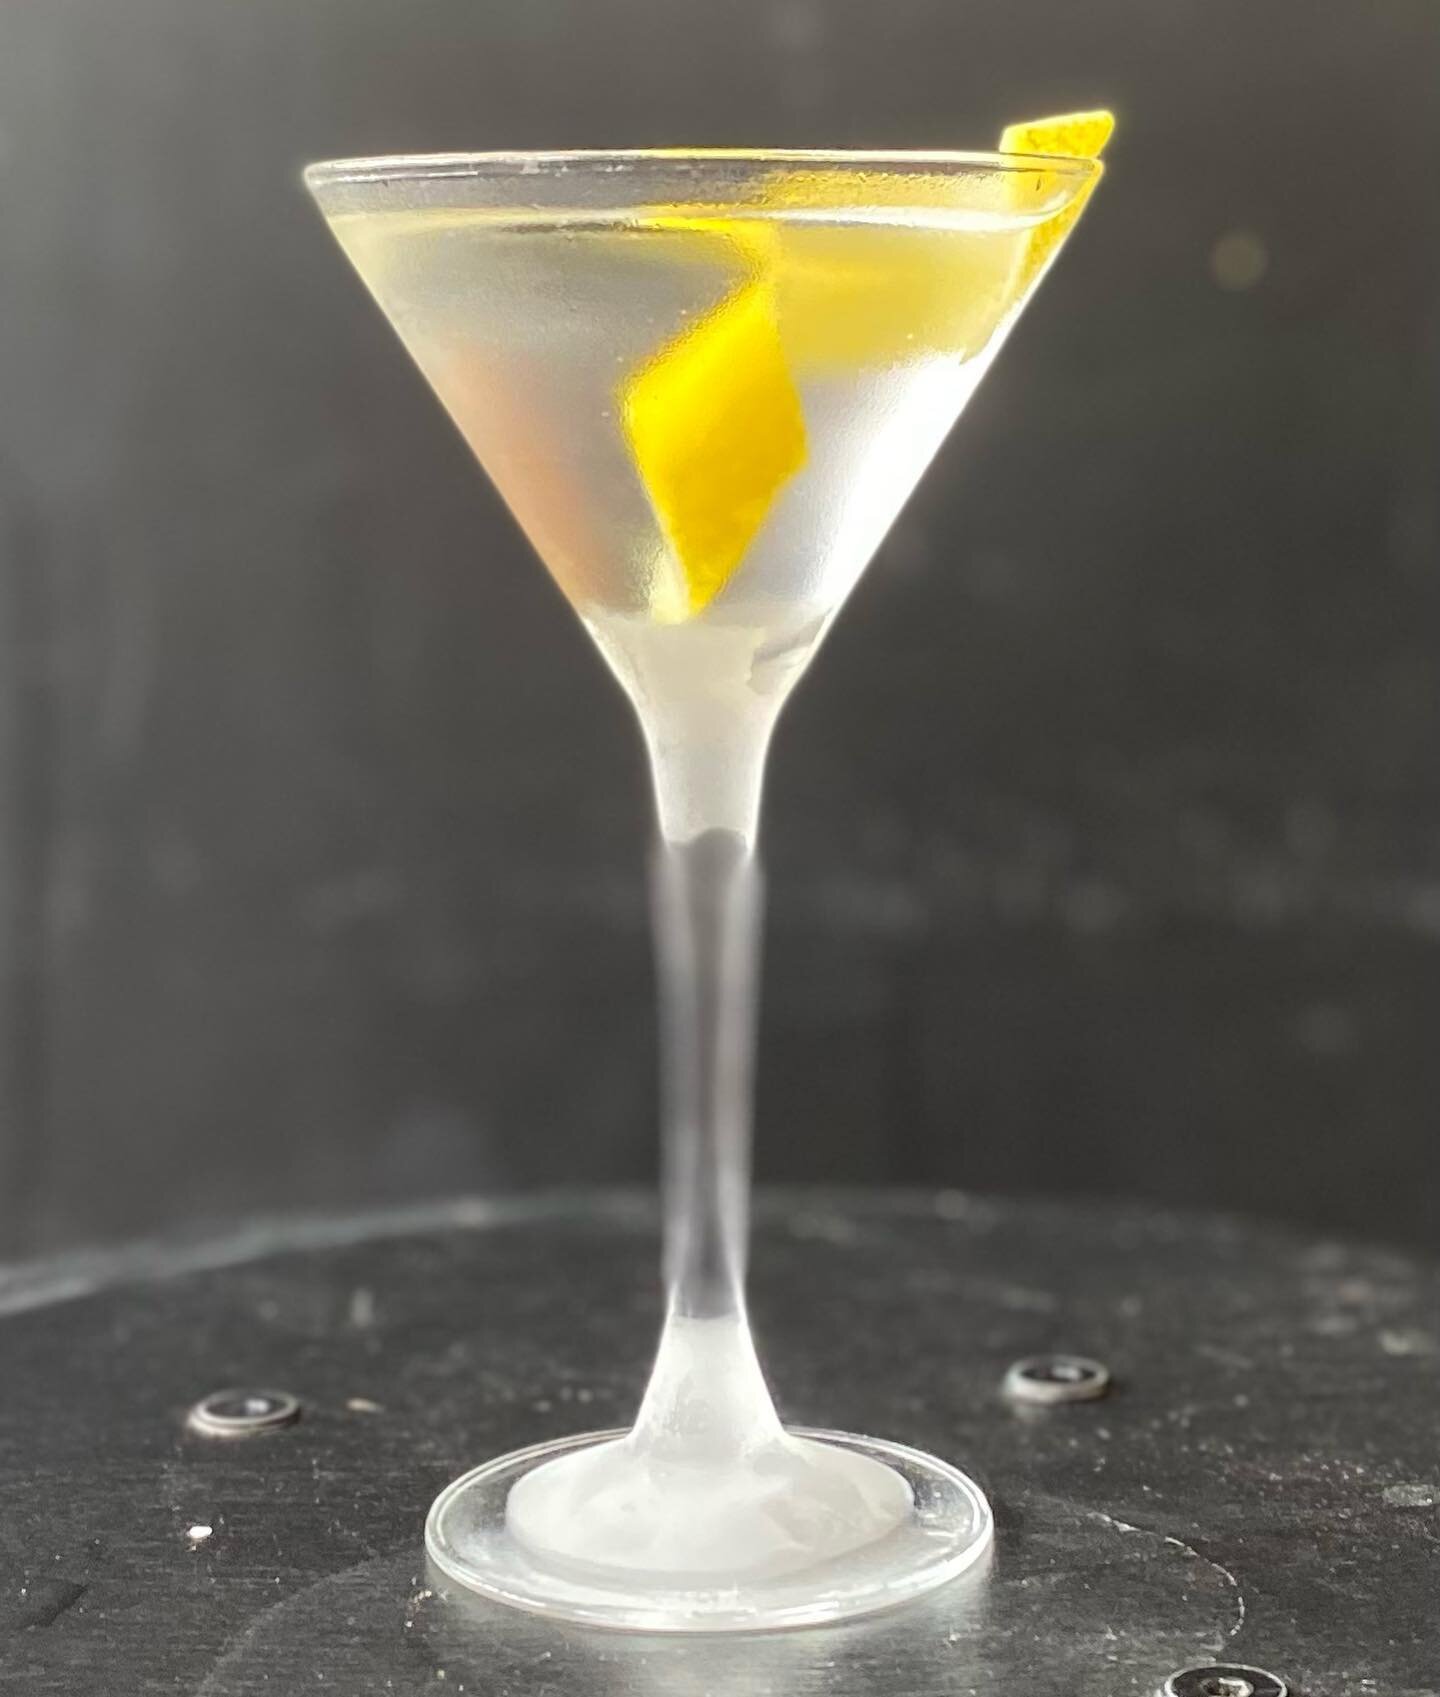 Vesper Martini

Shaken or stirred Mr Bond?

Invented by Bond author Ian Fleming. This tasty martini first appeared in his book &lsquo;Casino Royal&rsquo; in 1953

On the menu this week
.
.
.
.
.
.
#martini #jamesbond #vespermartini #casinoroyal #pant